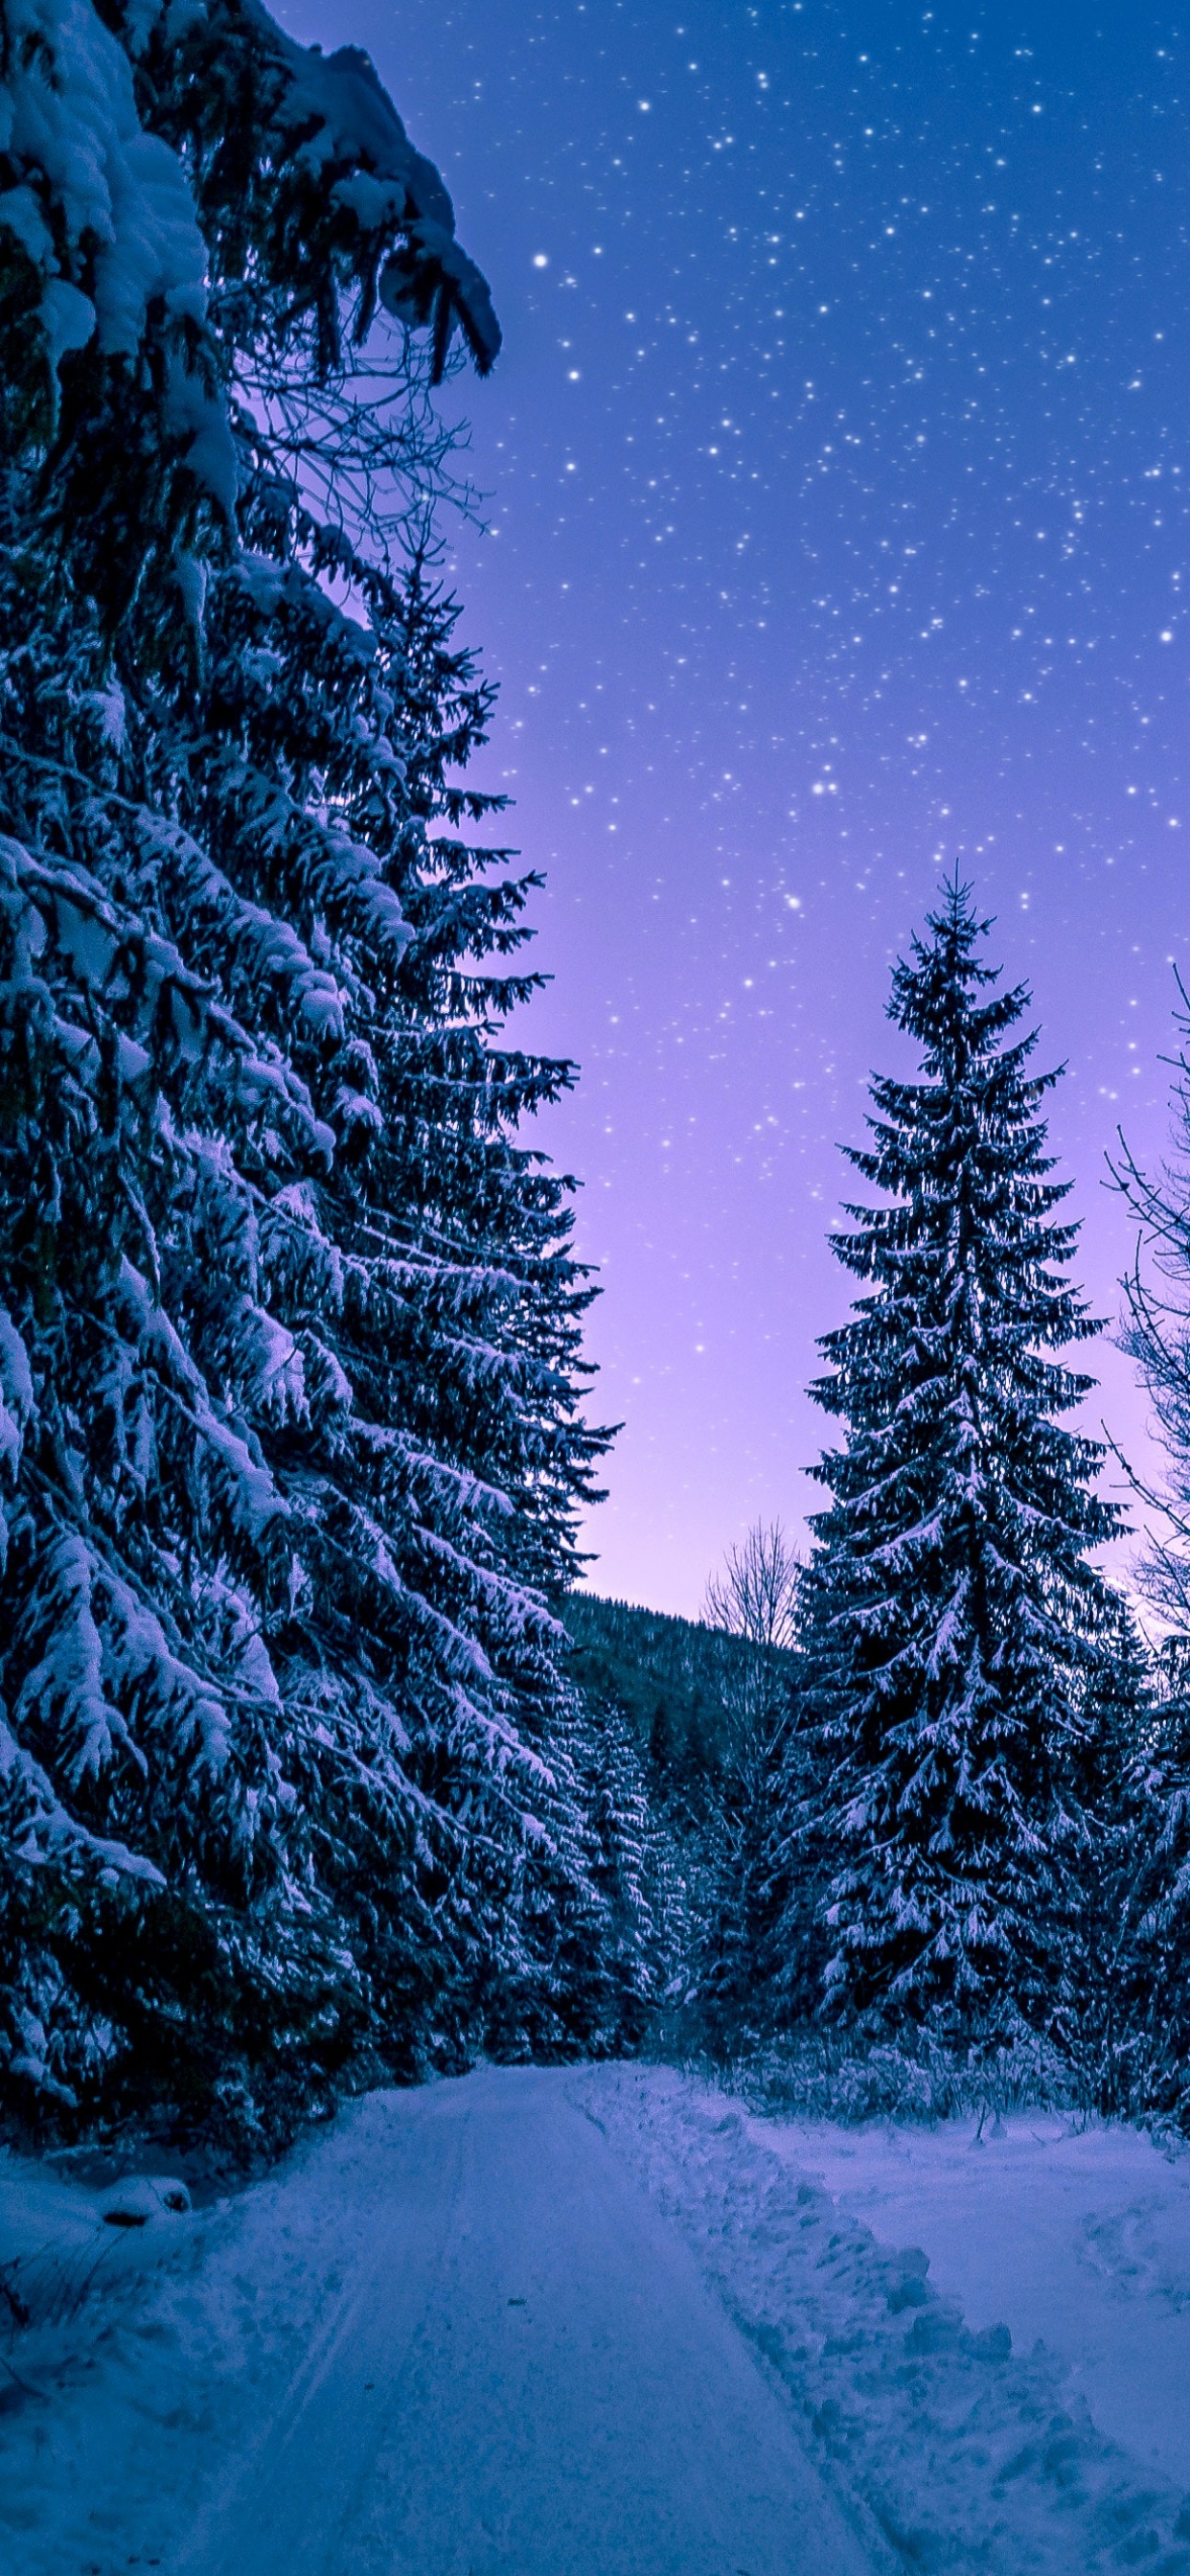 Snowy Trees Wallpaper 4k Winter Forest Frozen Snow Covered Night Sky Nature 5591